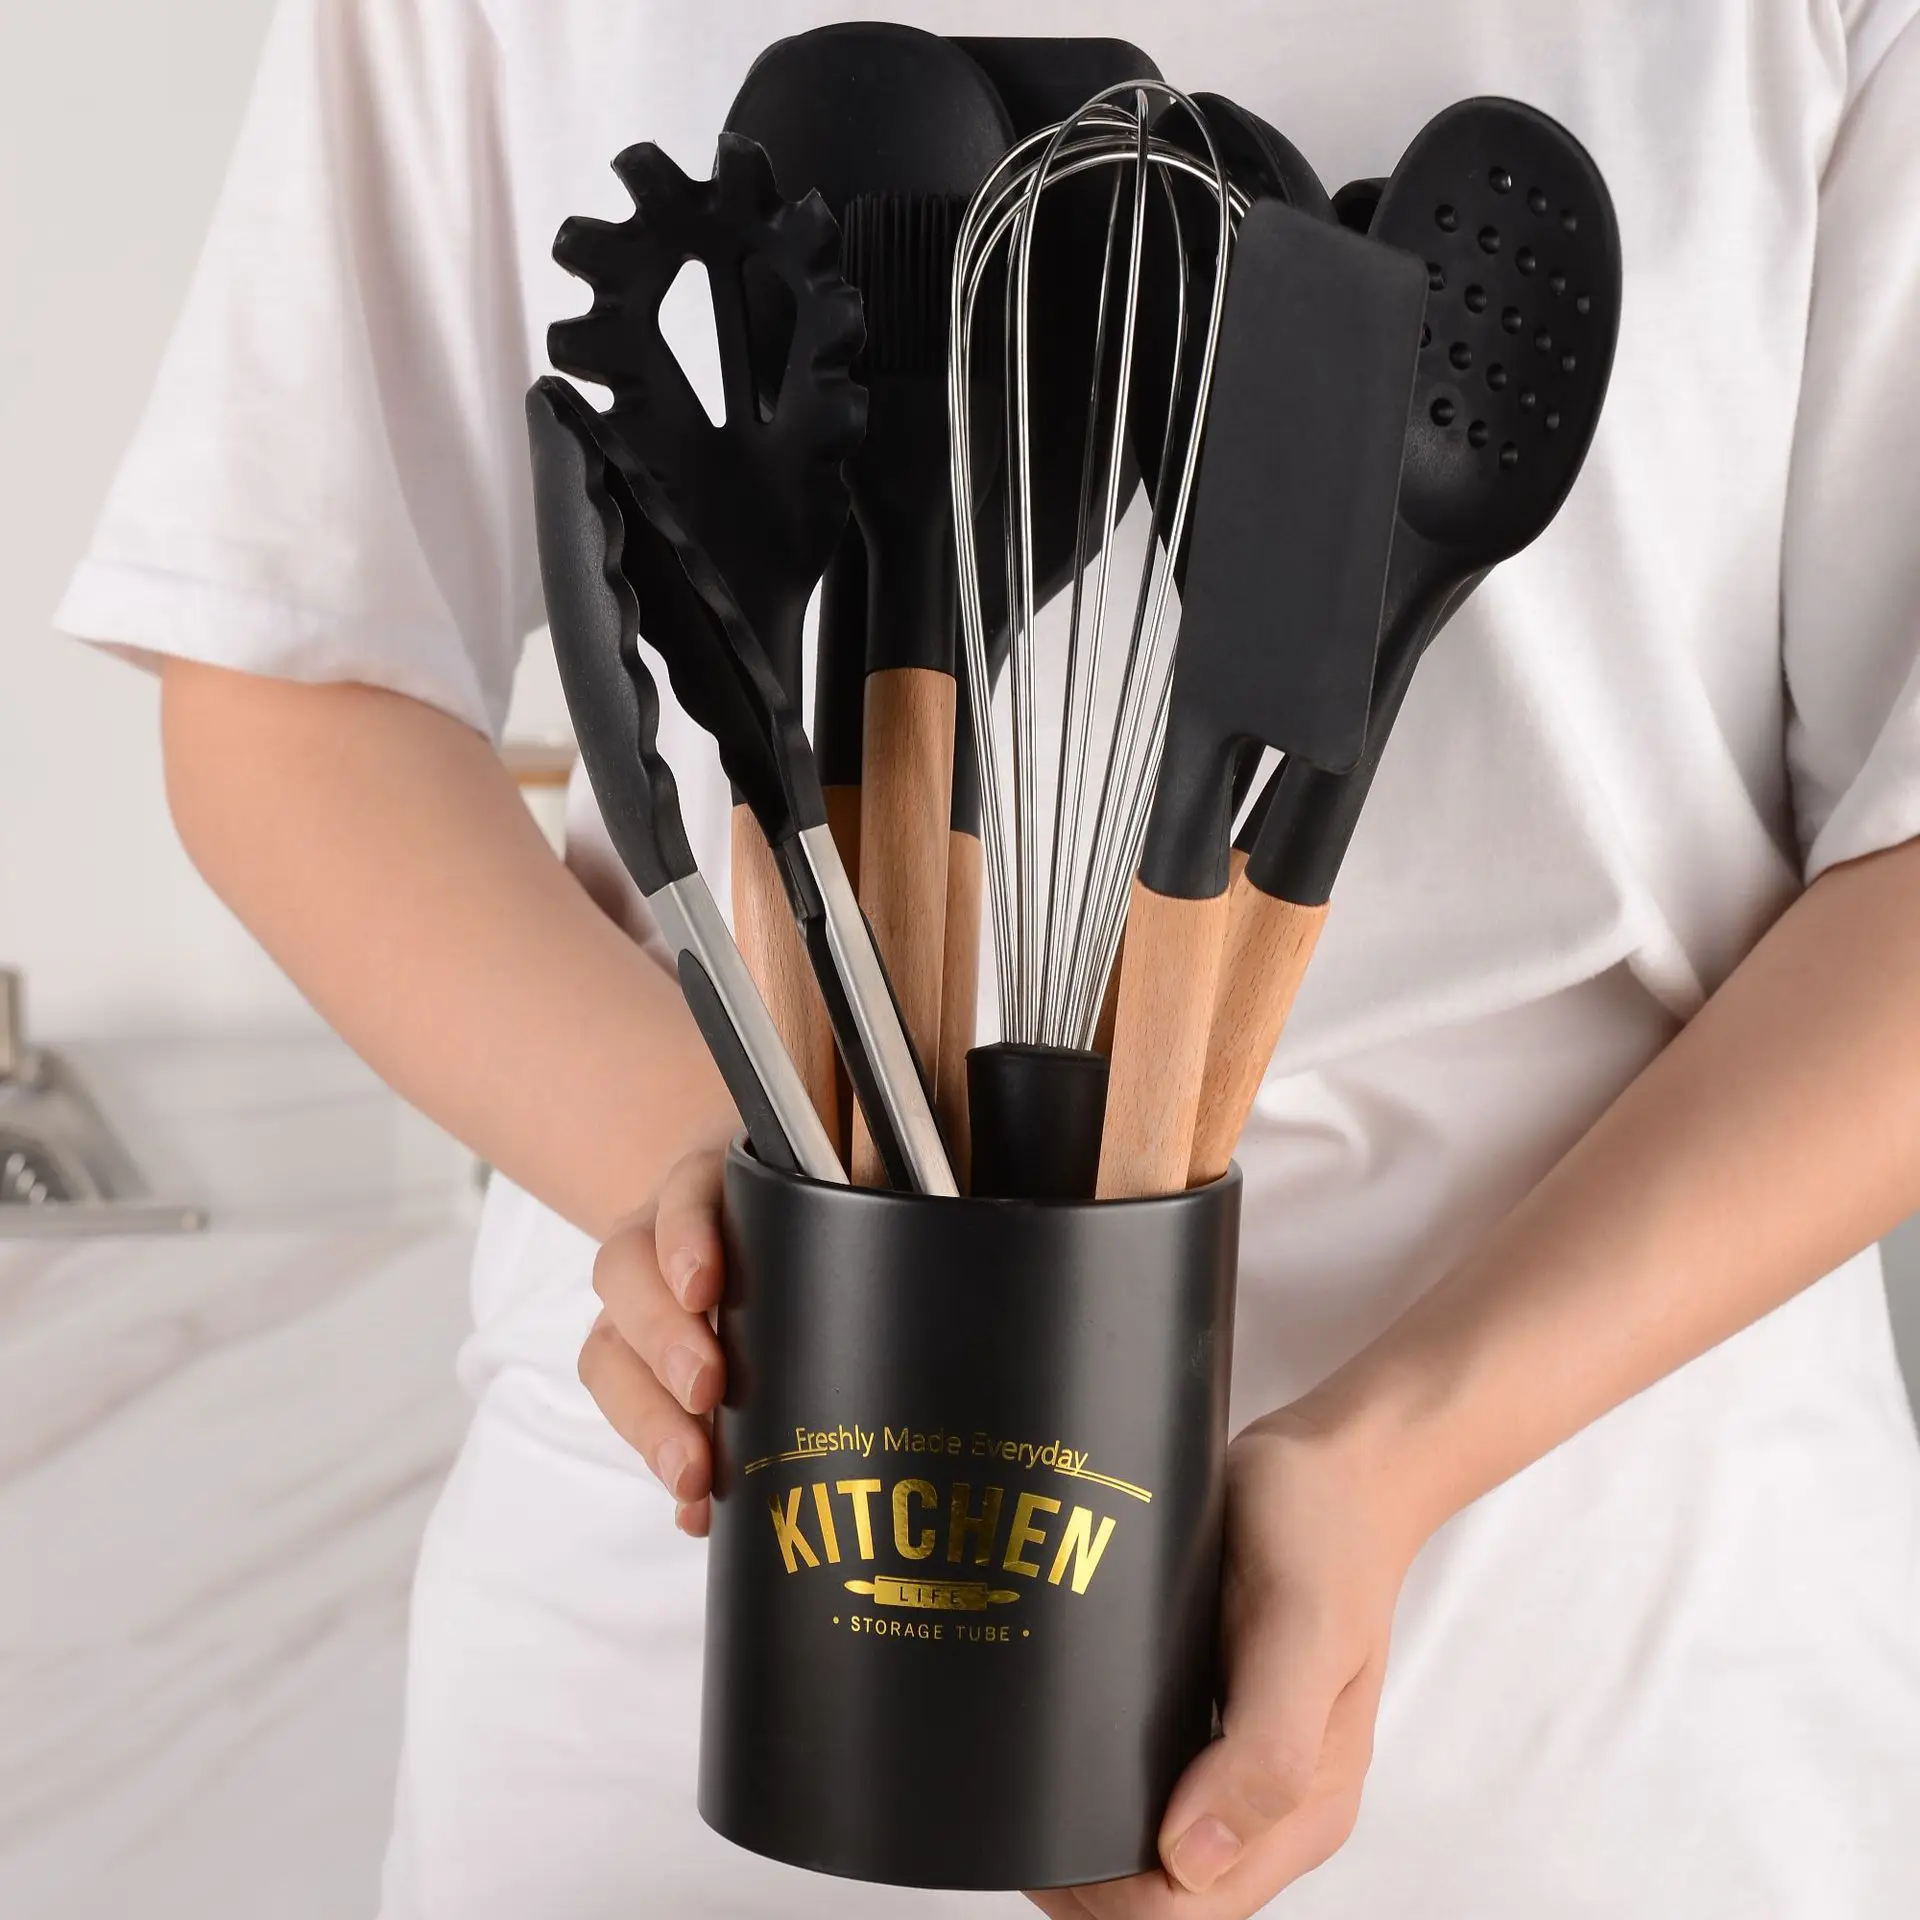 10 pcs set Black Cooking Silicone Utensils With Beech wood handle Multifunction Handle Non-Stick  kitchen gadget and accessories